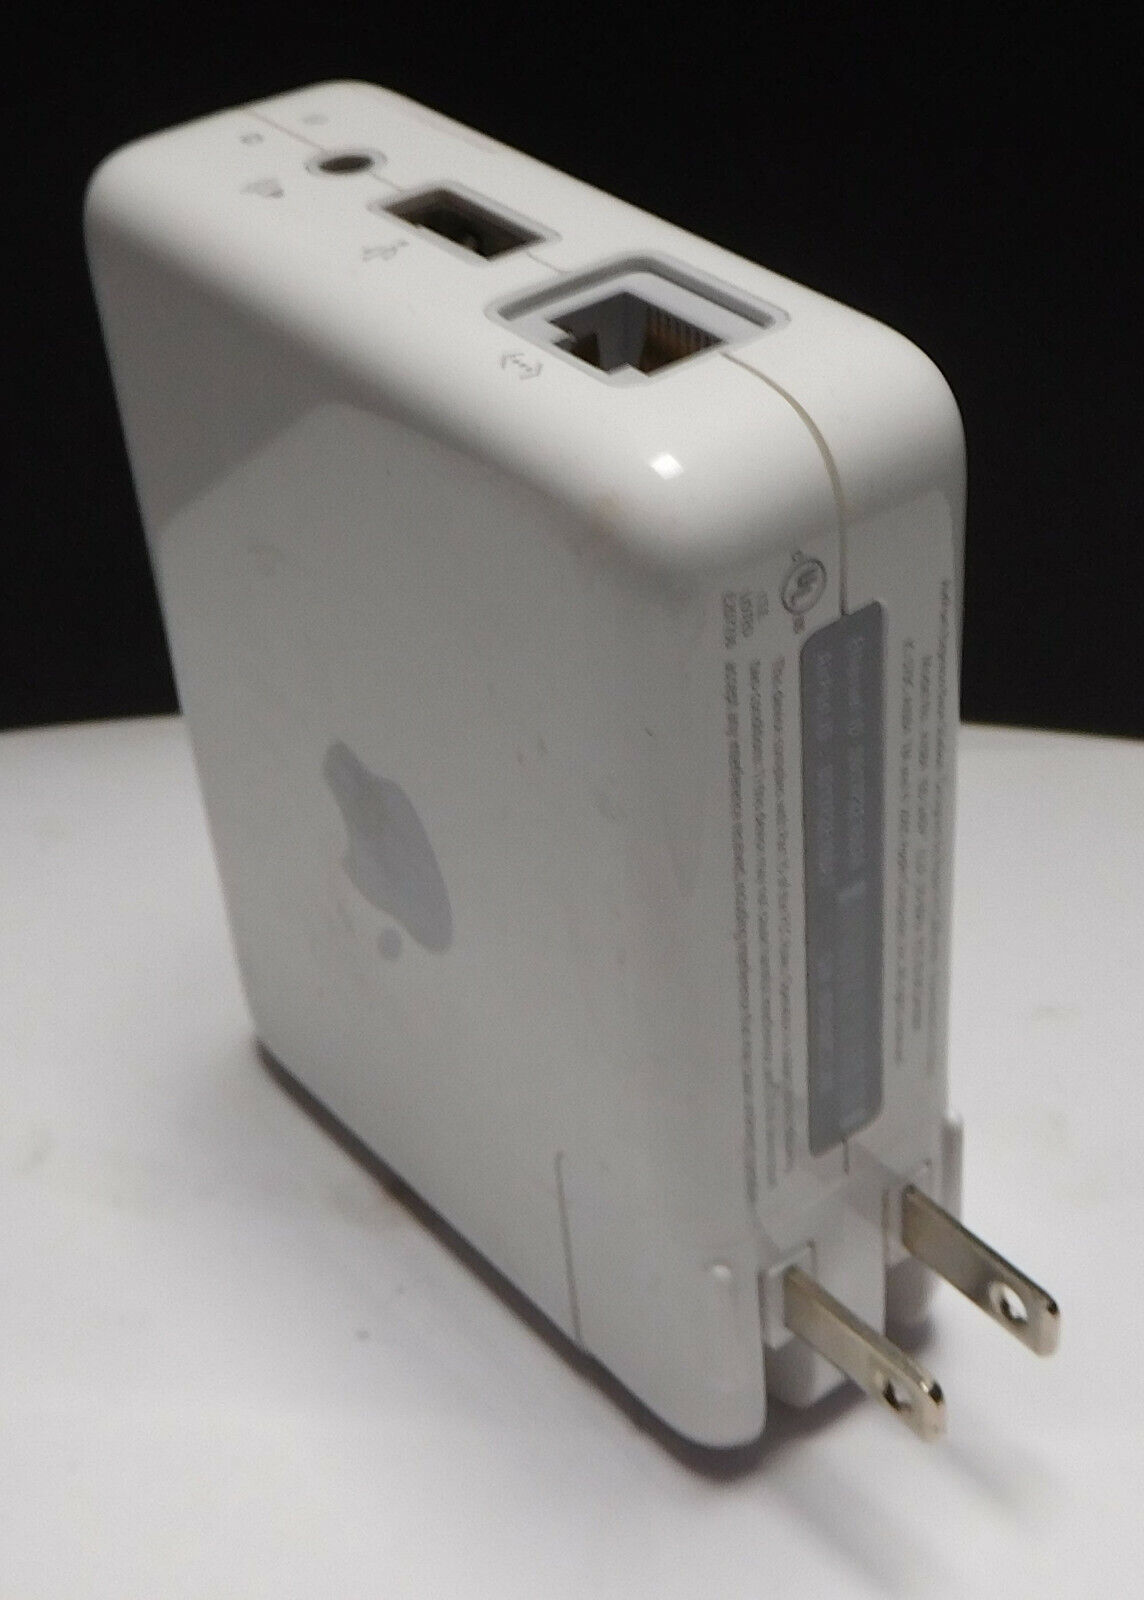 Genuine Apple AirPort Wi-Fi Base Station MODEL A1084